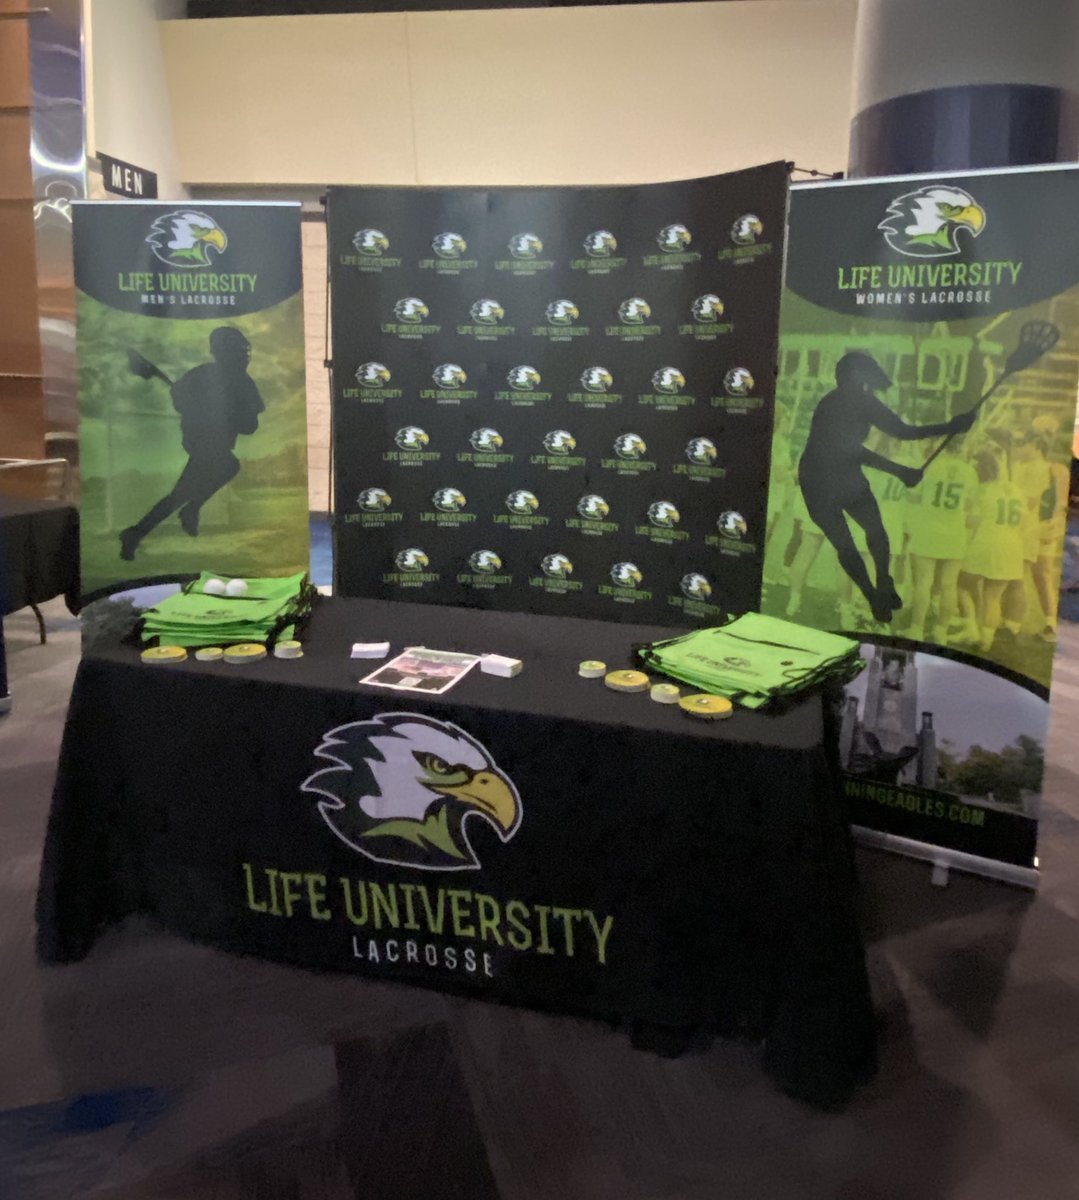 Check out our table to get info about Life U Lacrosse at tonight’s  @georgiaswarmlax game. 

#wearestingcity #nll #naialacrosse #collegelacrosse #lacrosse #lax @lifeuathletics @lifeuniversityga @nll